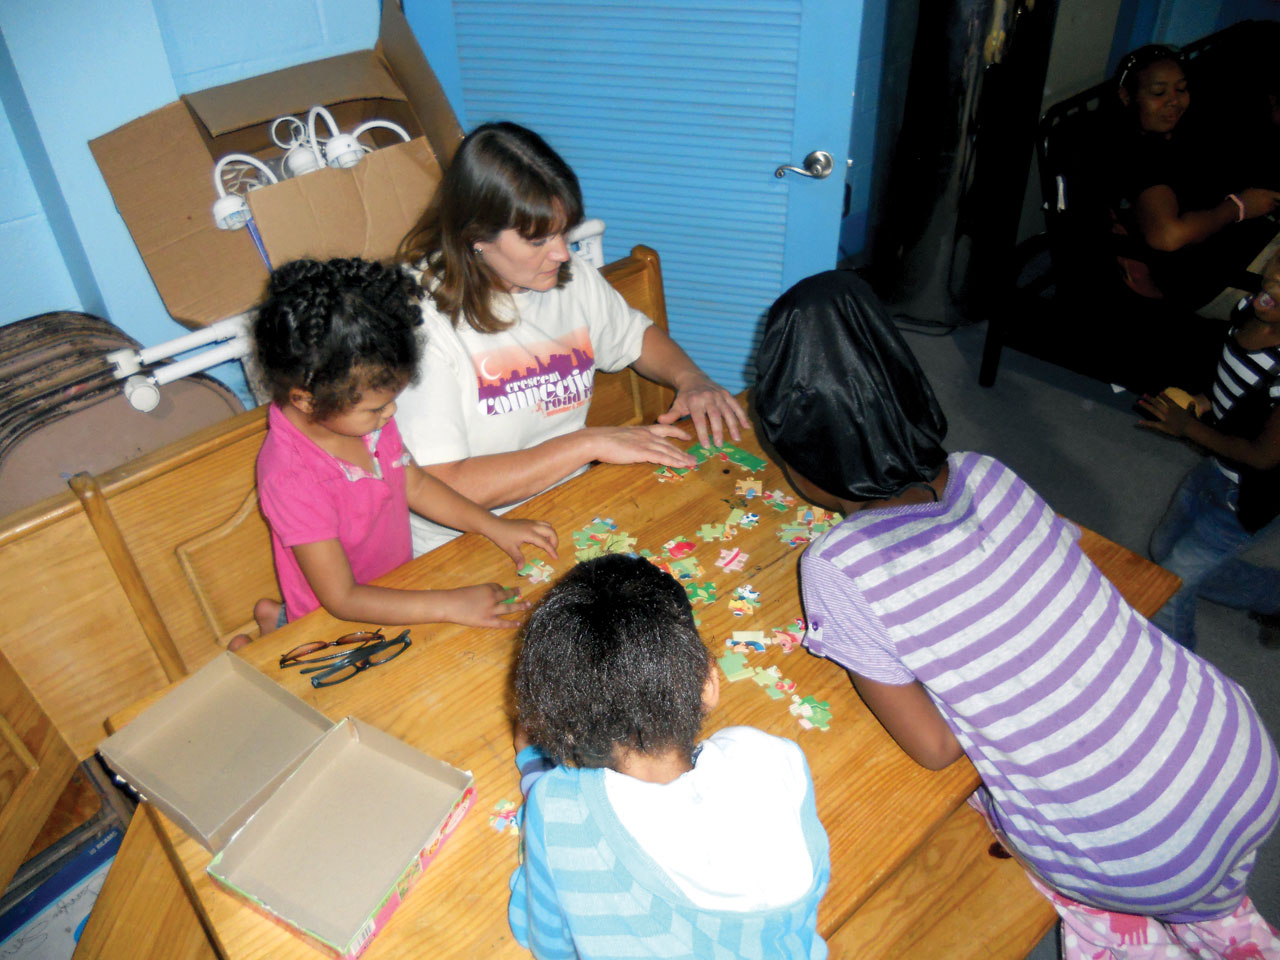 Bennett works with client children in the Friendship House to put together a puzzle. (Photo: Provided)